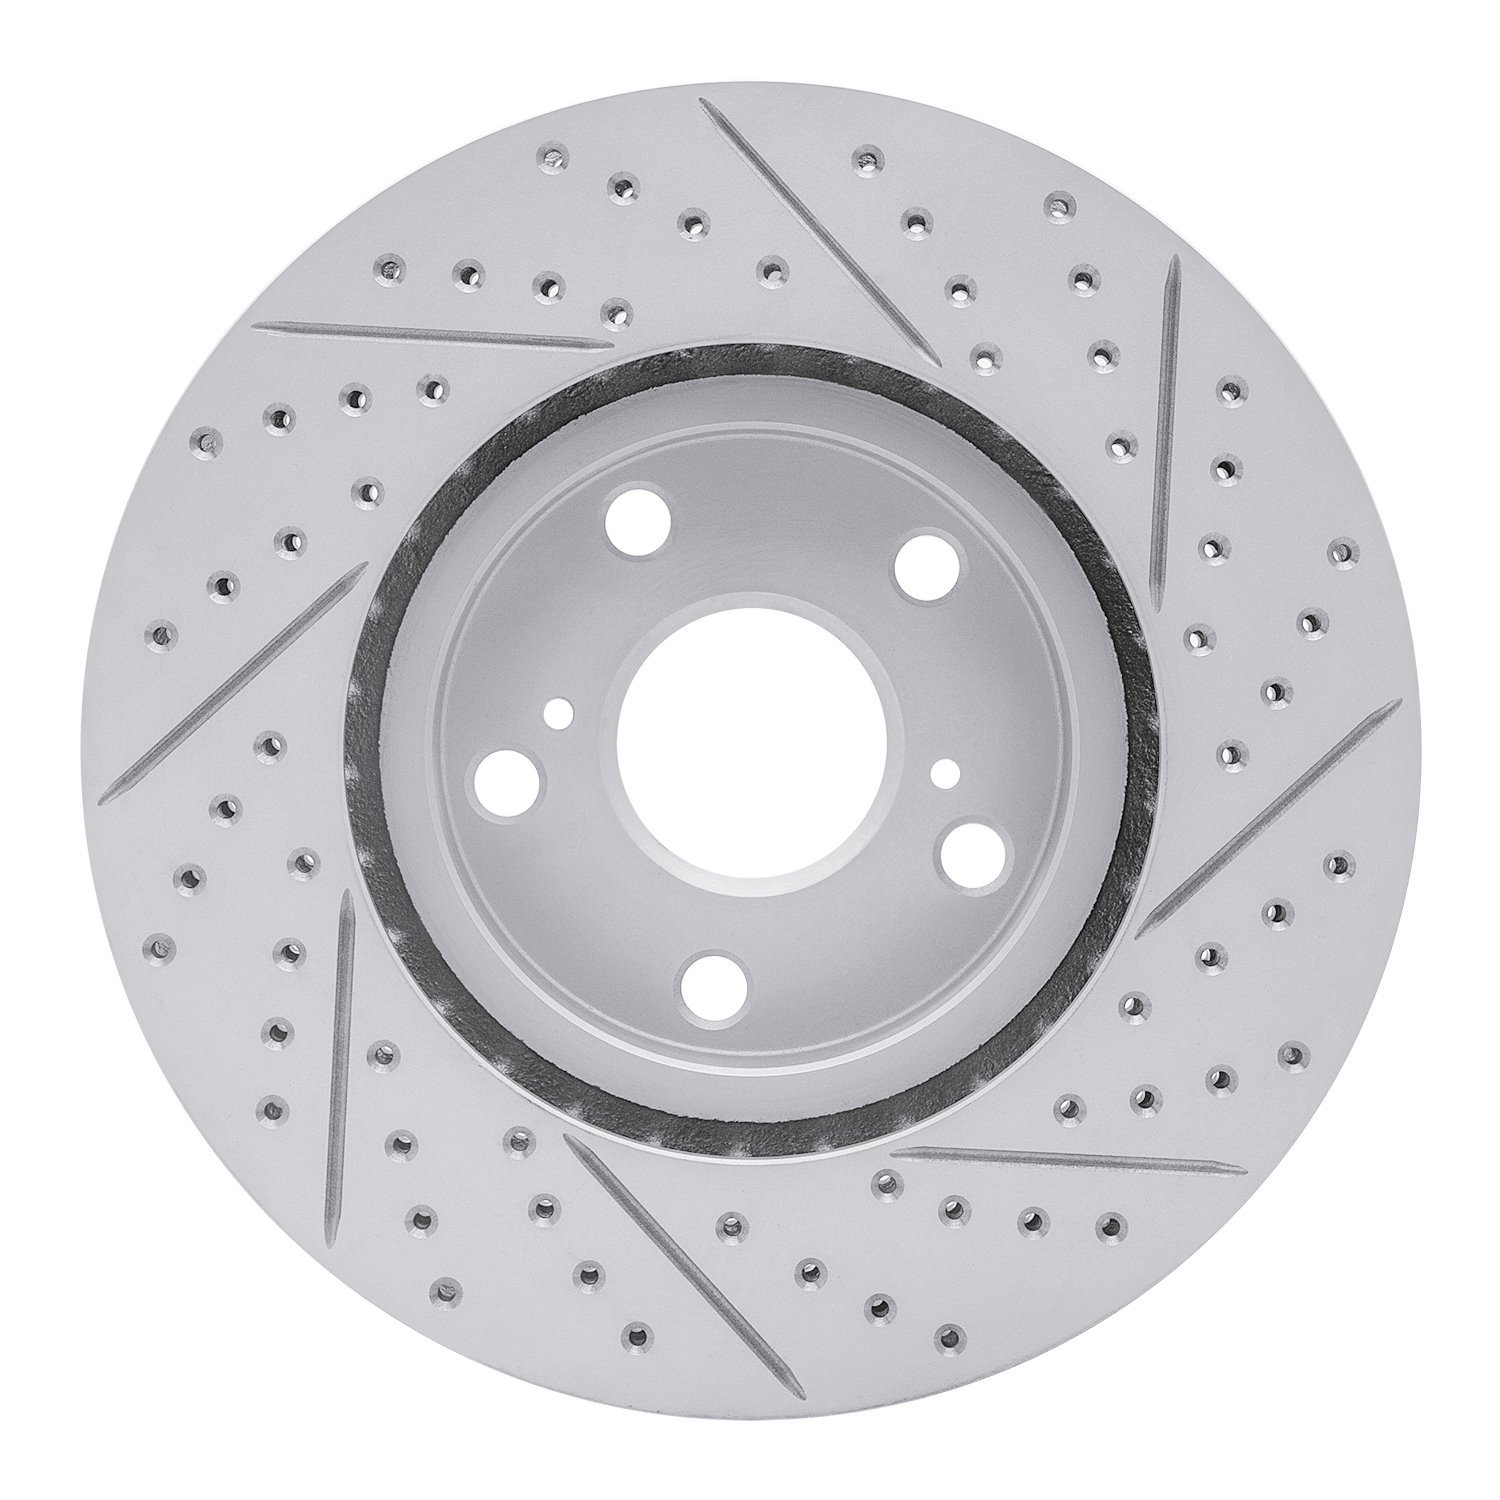 830-75014D Geoperformance Drilled/Slotted Brake Rotor, 2006-2015 Lexus/Toyota/Scion, Position: Left Front